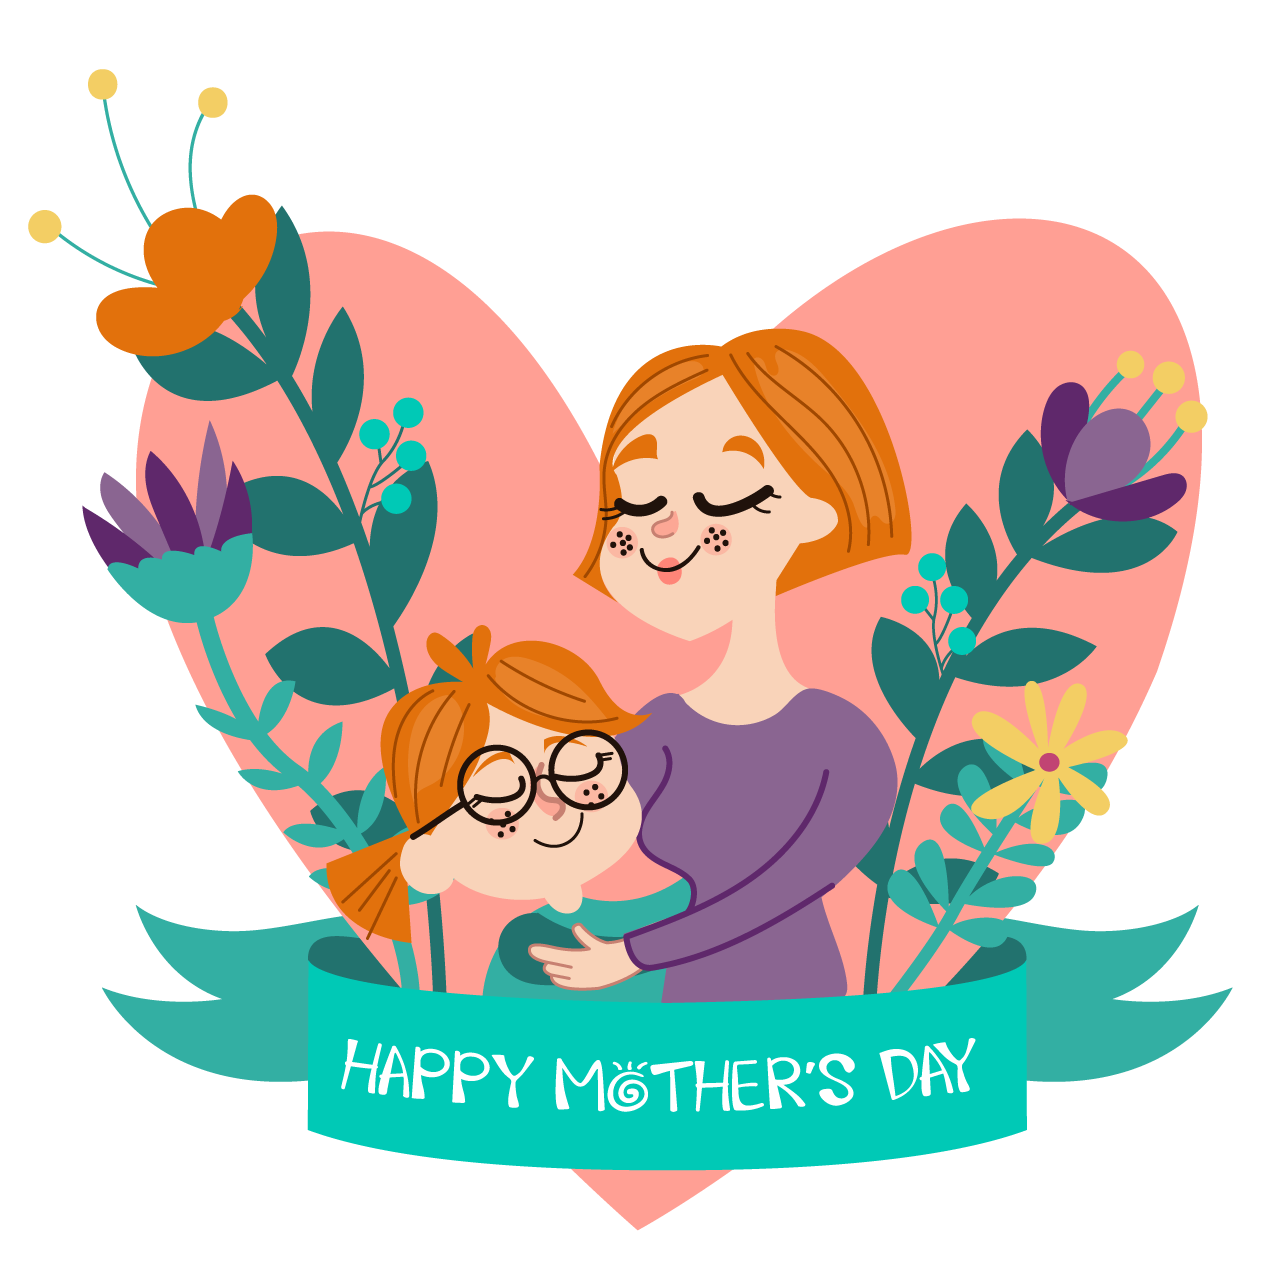 Love heart clipart mothers day cartoon illustration image hand drawing sketch